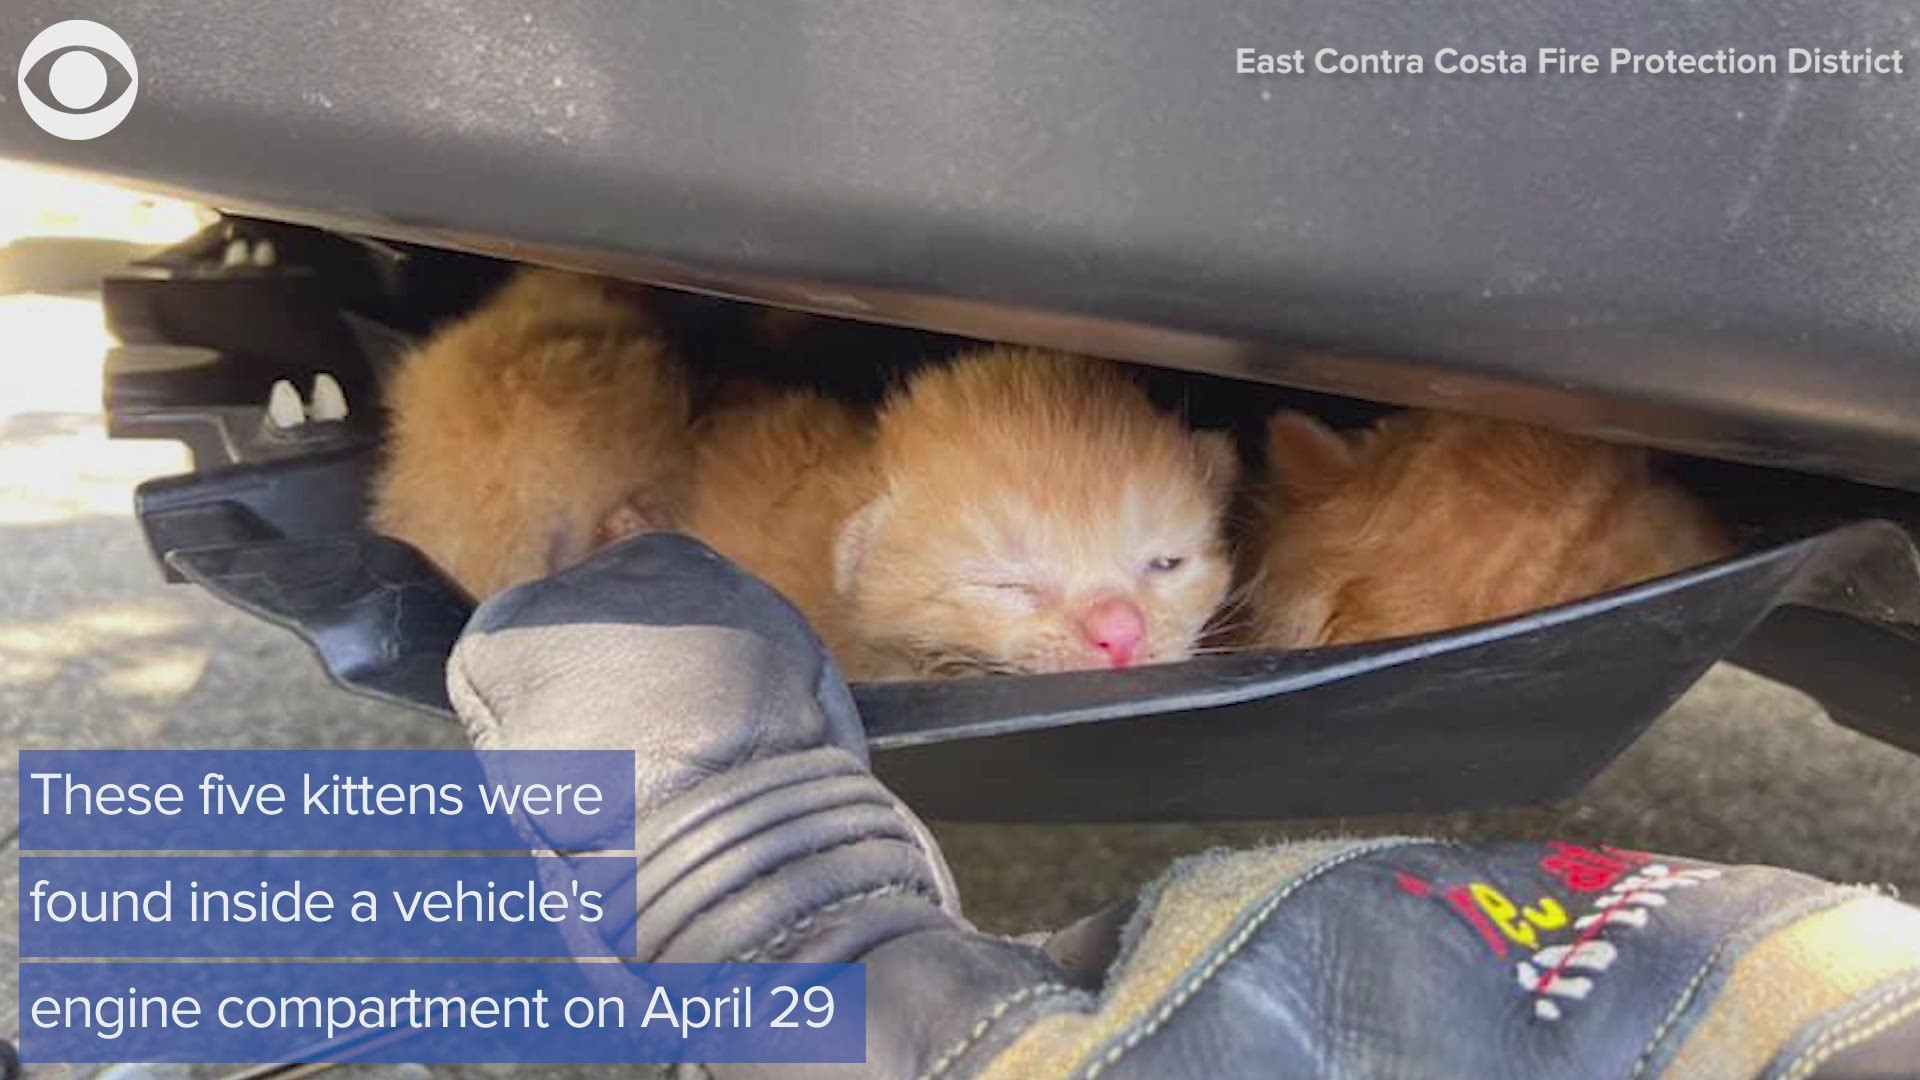 A Californian woman and her son thought a cat was stuck inside their vehicle's engine compartment. What first responders found was quite a fuzzy surprise.